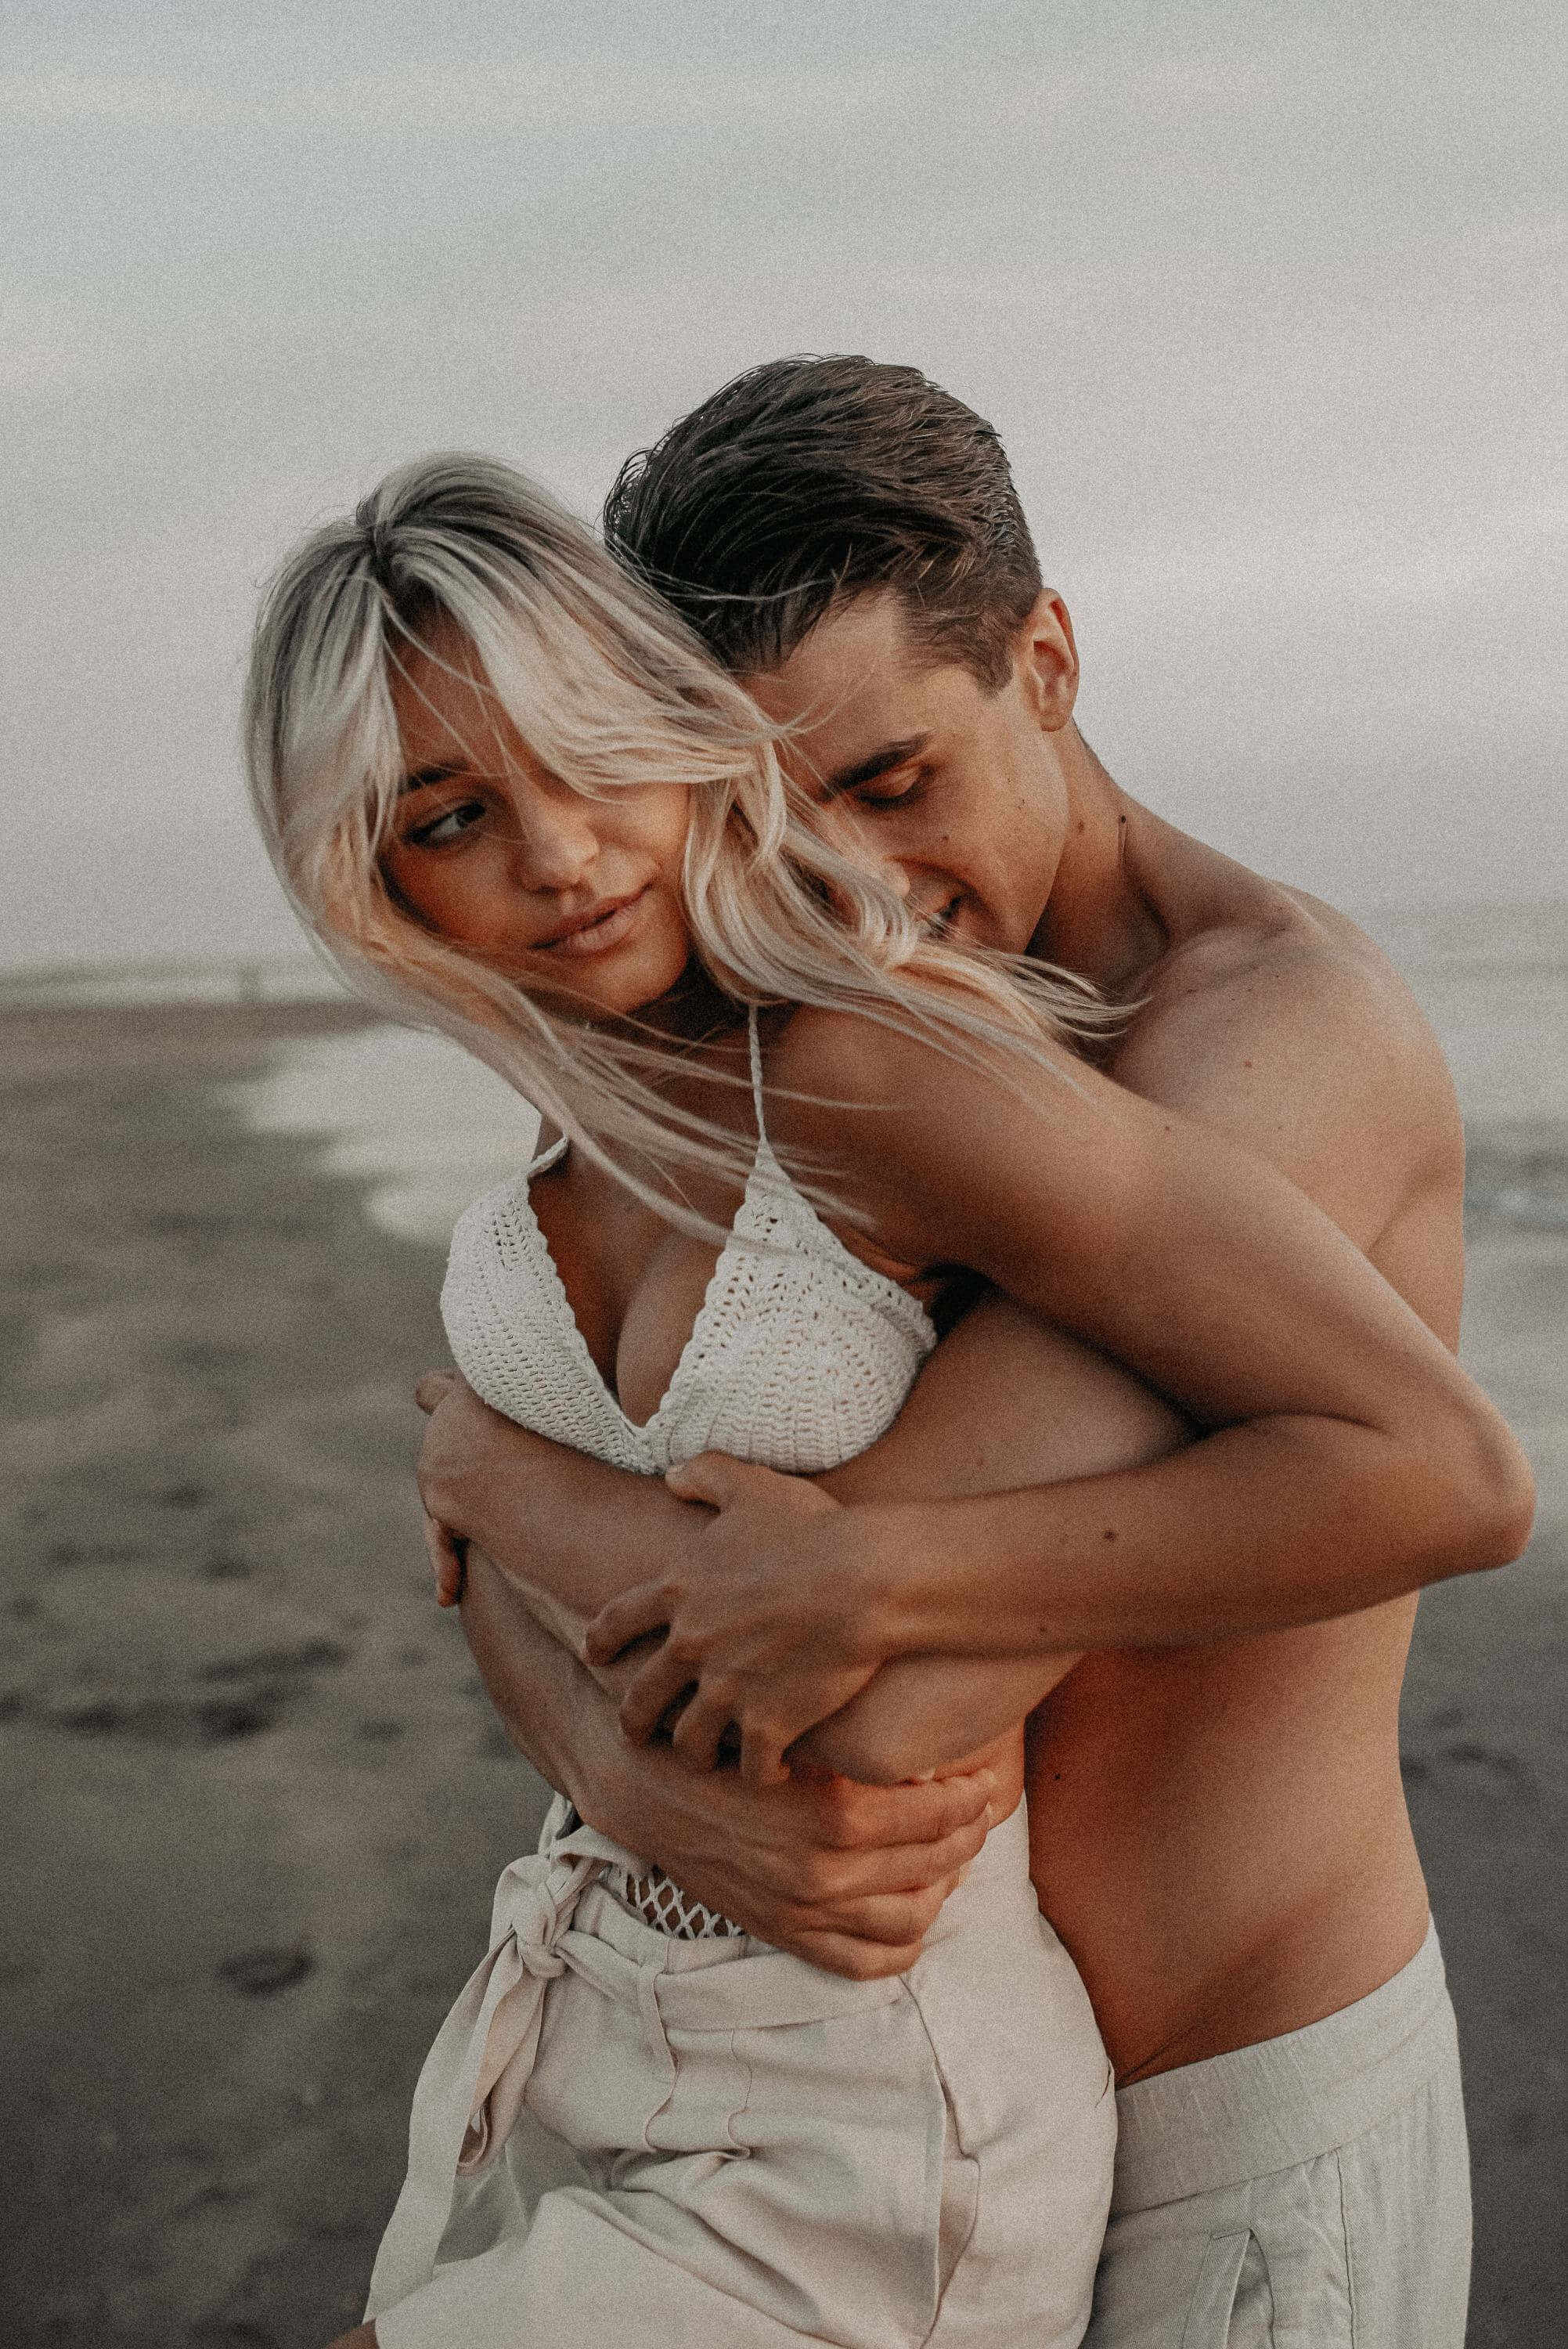 With his arms wrapped around her from behind, a shirtless young man lovingly holds his wife, dressed in a vintage top, on the beach.